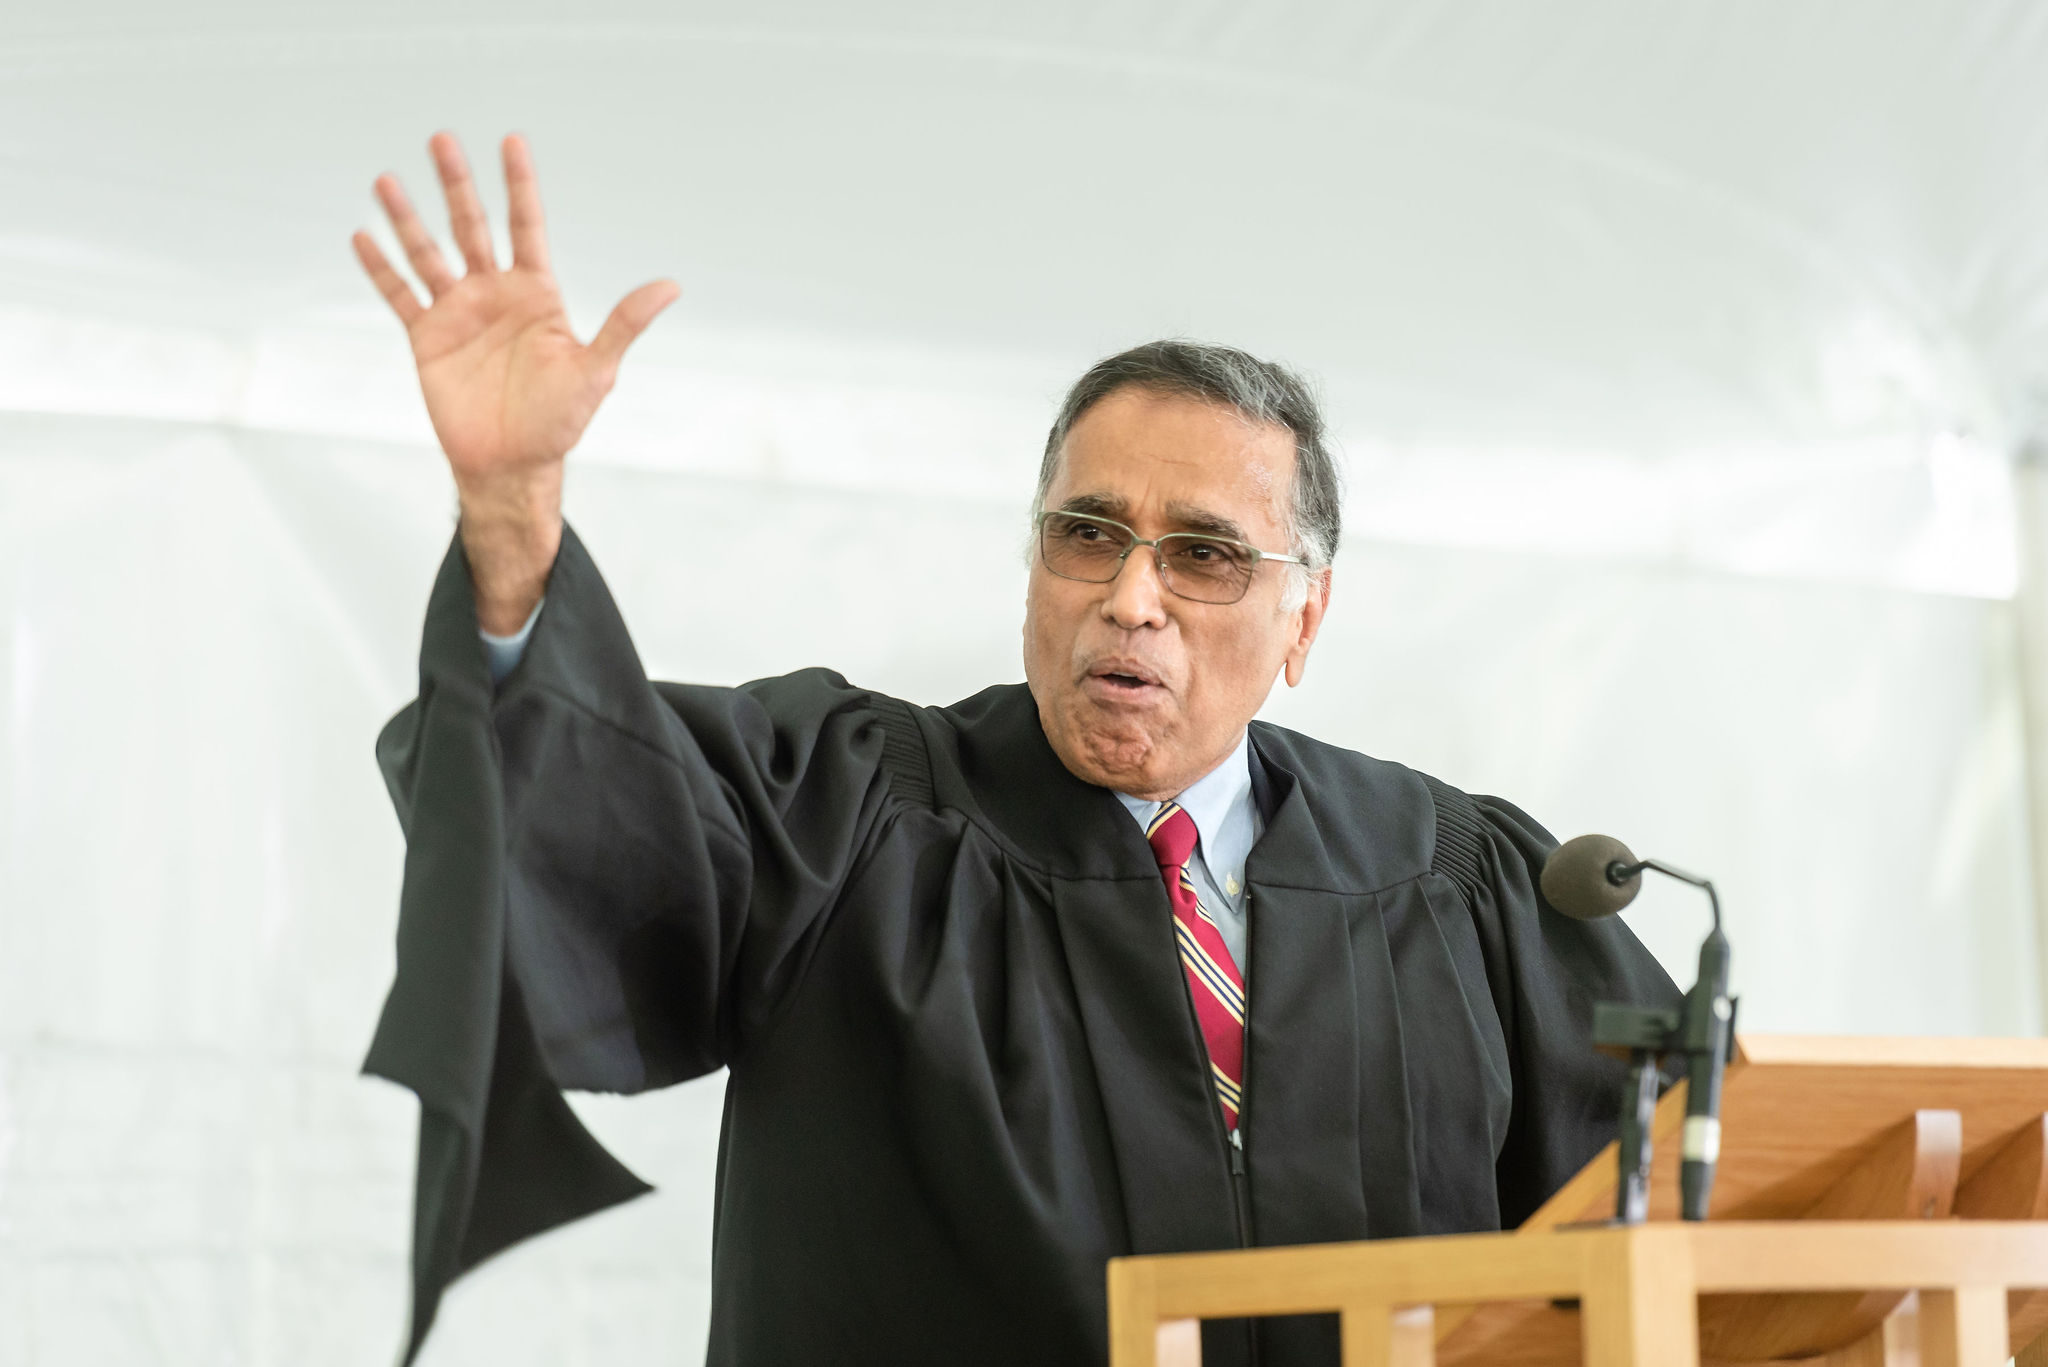 A speaker gesturing from a podium